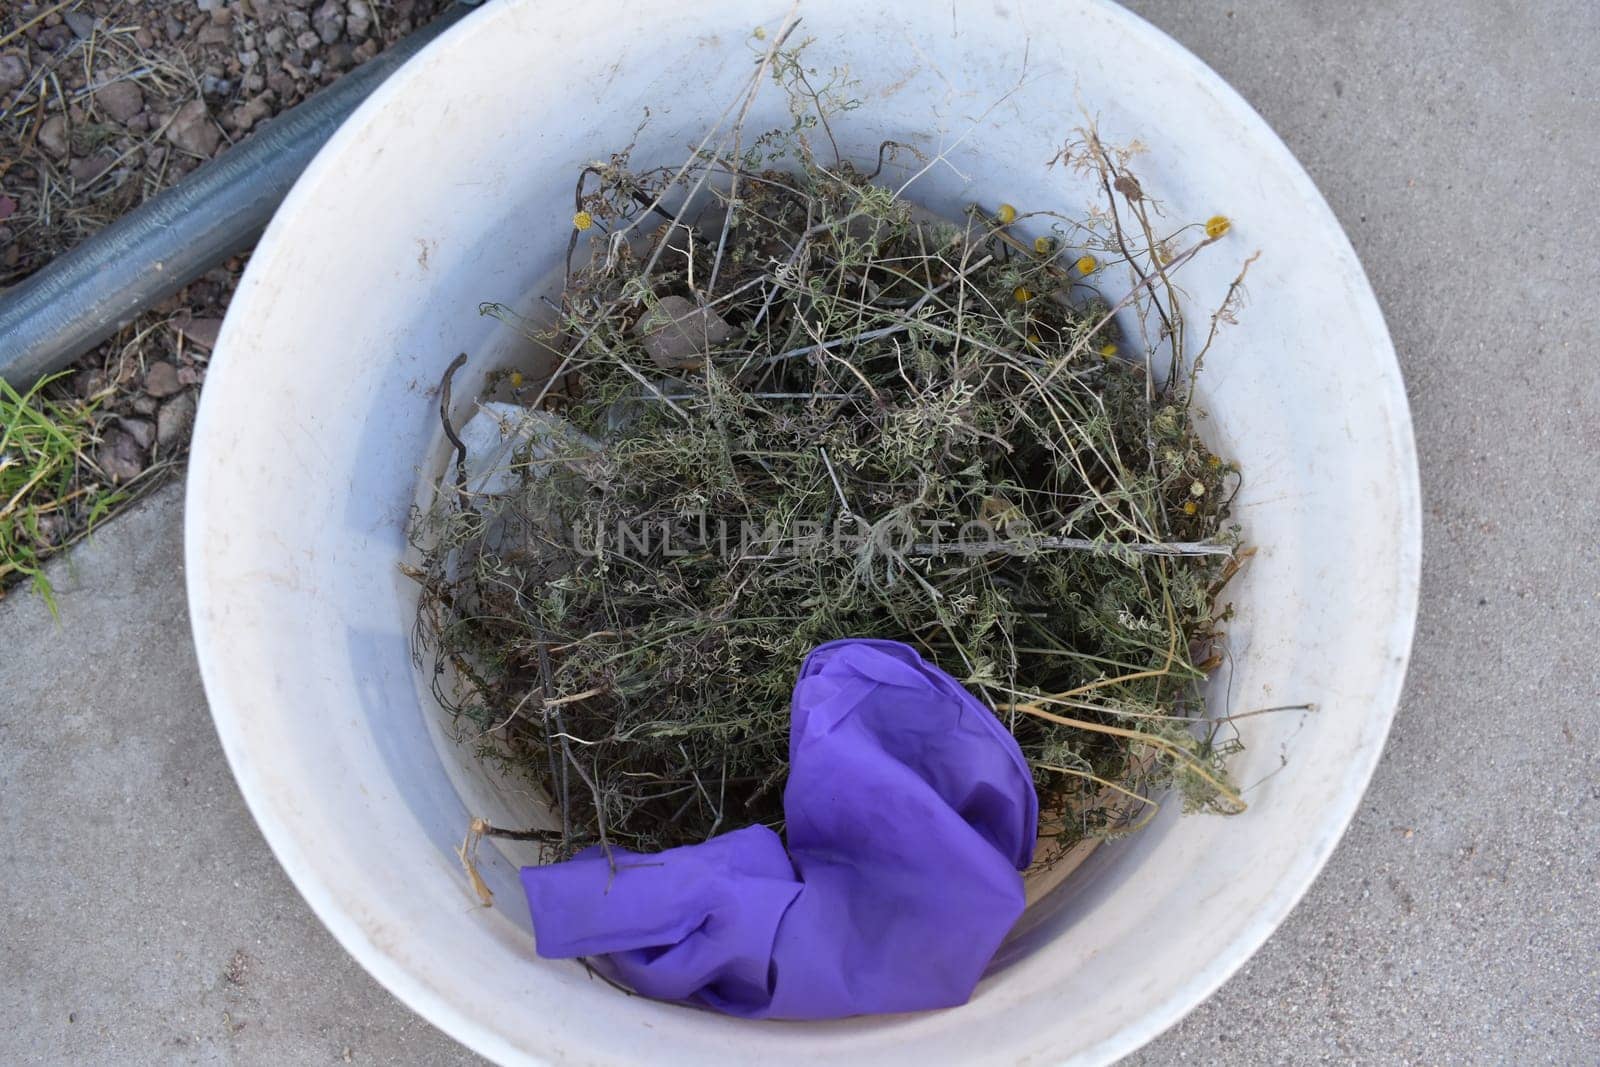 Bucket Full of Pulled Weeds and Used Latex Glove. High quality photo